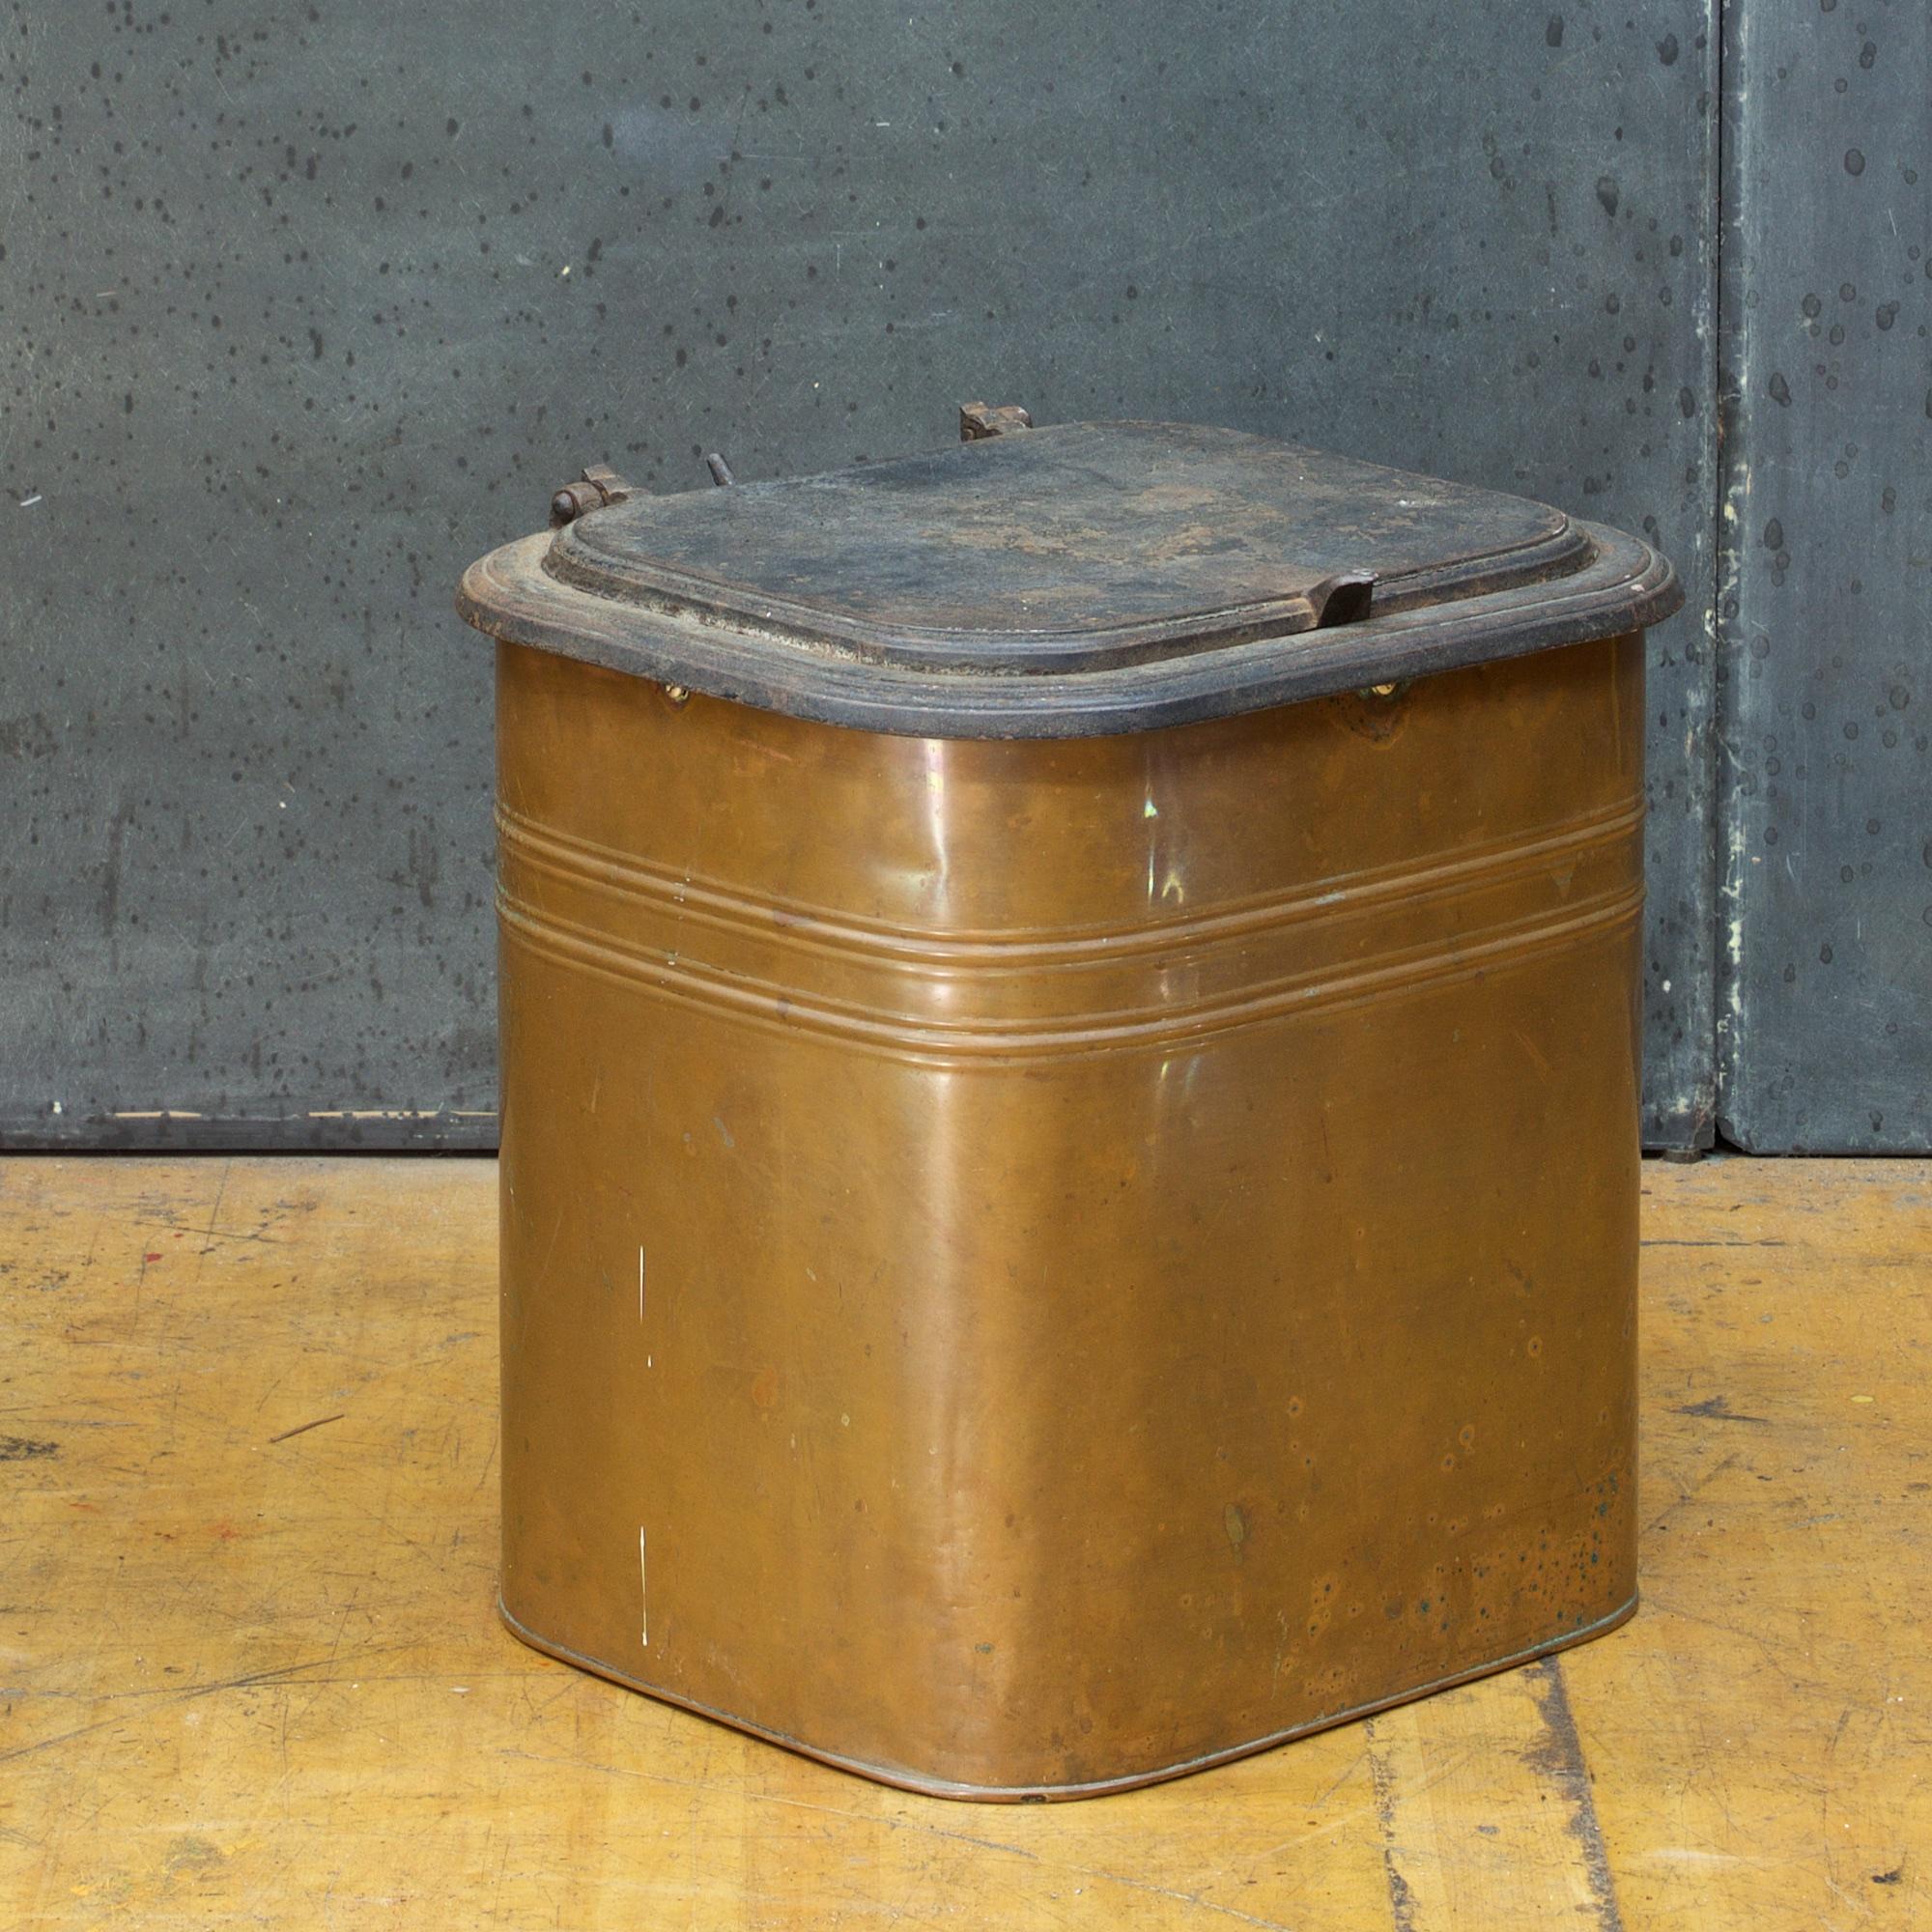 New York USA, circa 1880s.
Rochester Stamping Works. A scarce copper and cast iron lidded coal or ash bin, having a cast iron hinged lid and rim over a copper body. The interior lid stamped 